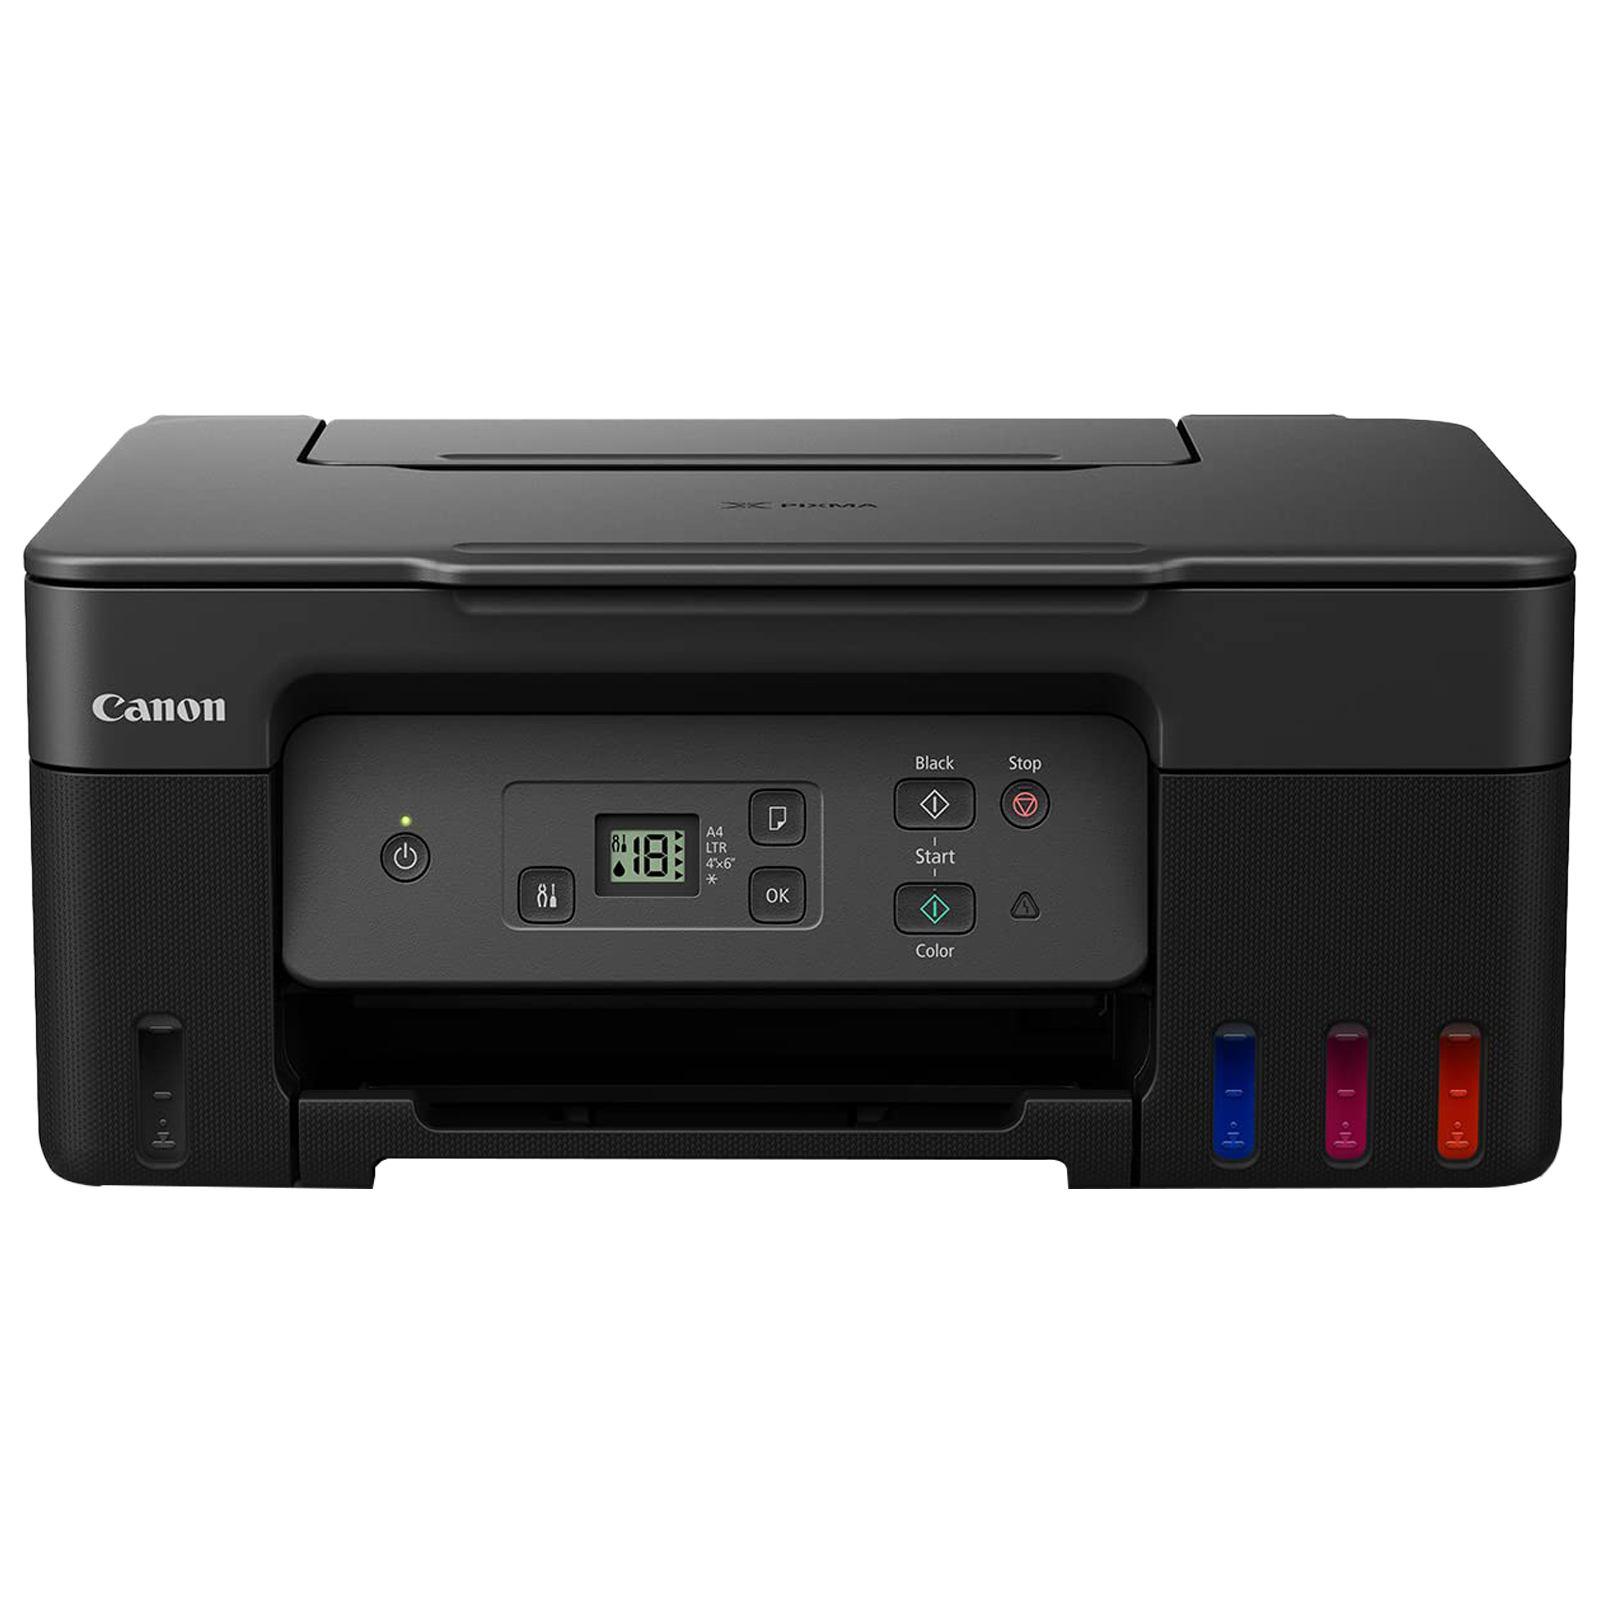 Buy Canon Pixma G2770 Color All In One Ink Tank Printer Contact Image Sensor 5804c018aa Black 4472